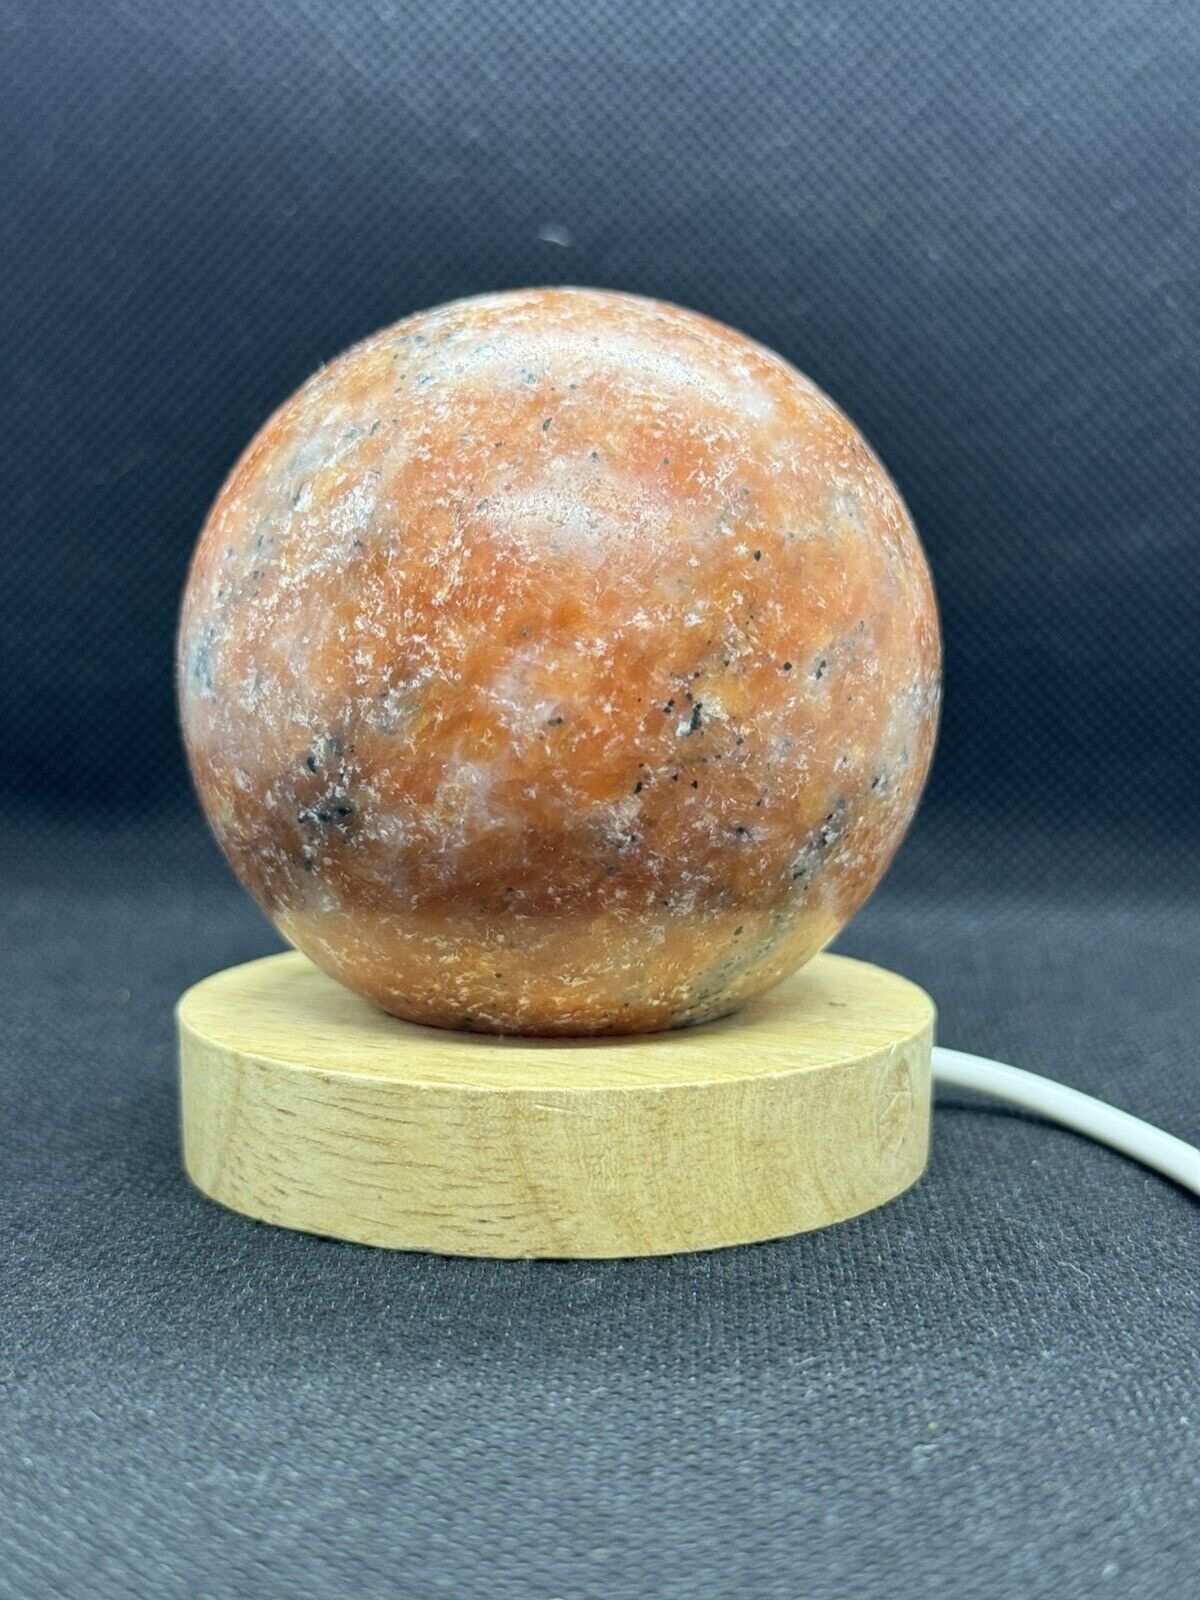 66mm Orchid Calcite Sphere Polished Natural Mineral Ball